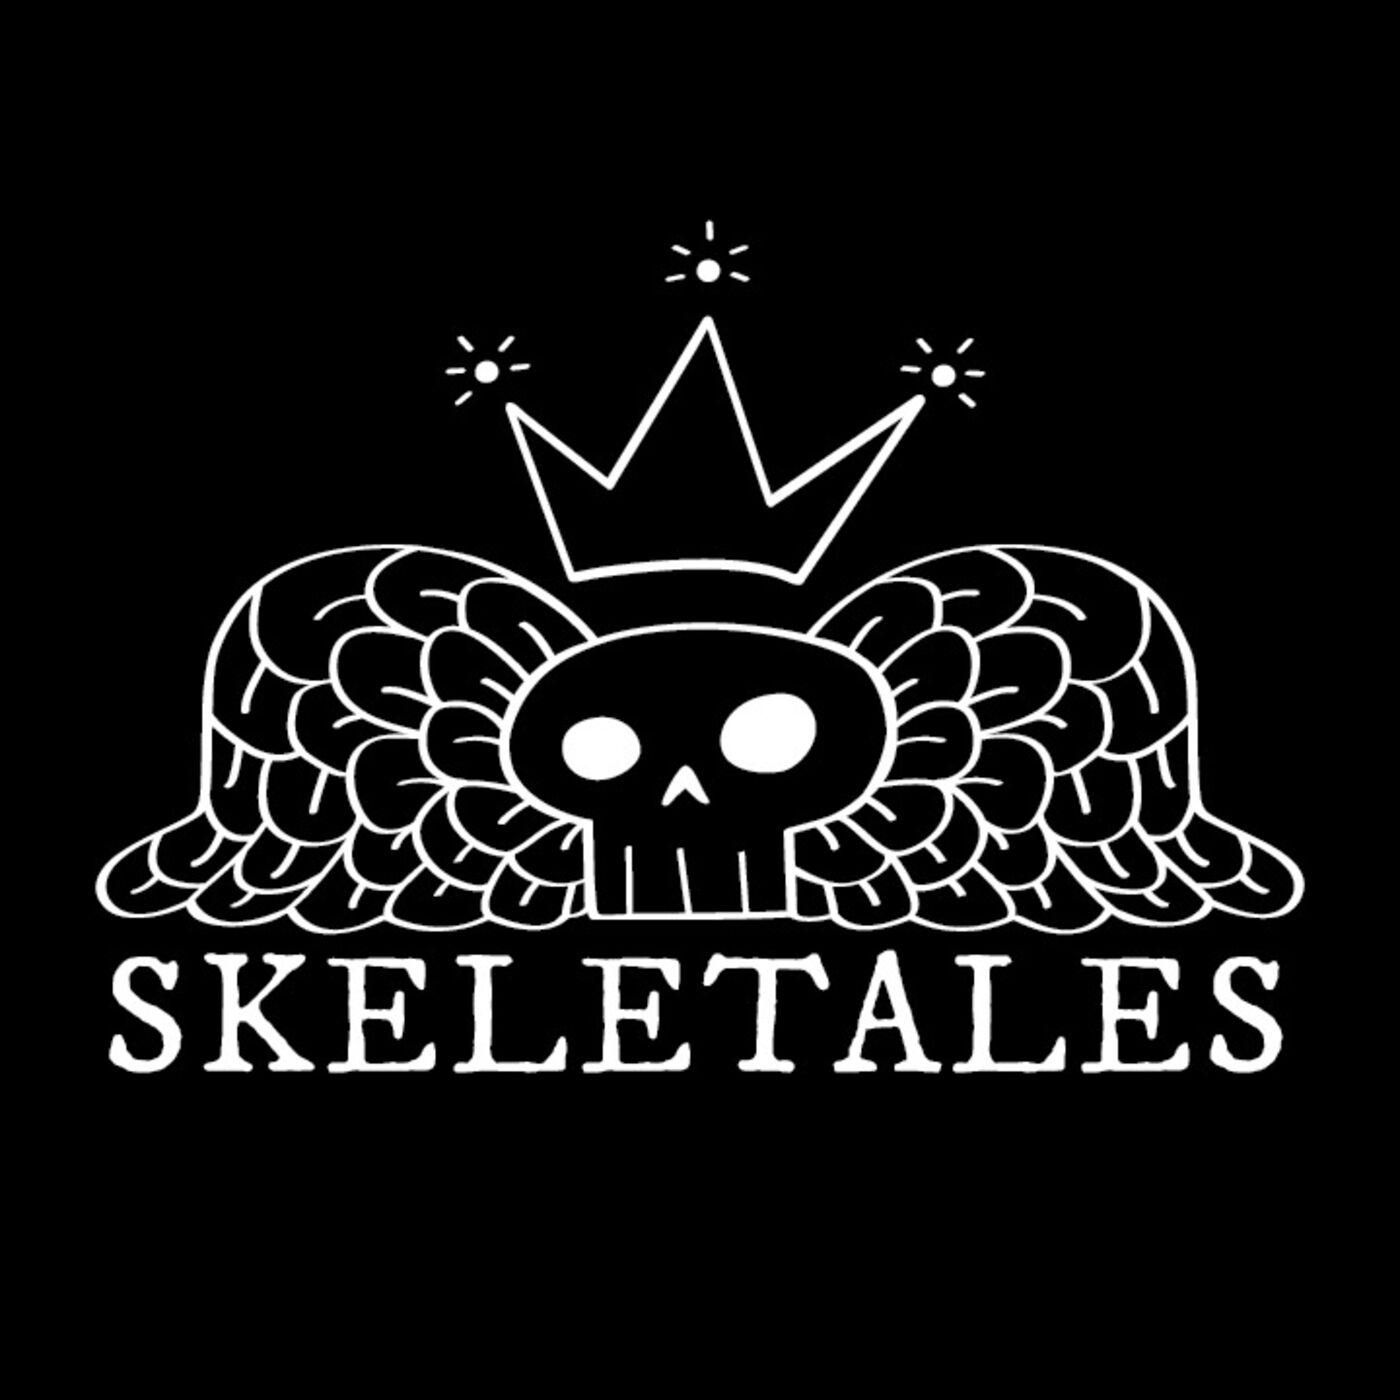 A SkeleTalk With Dr. Jess, Physician Medium by Skeletales